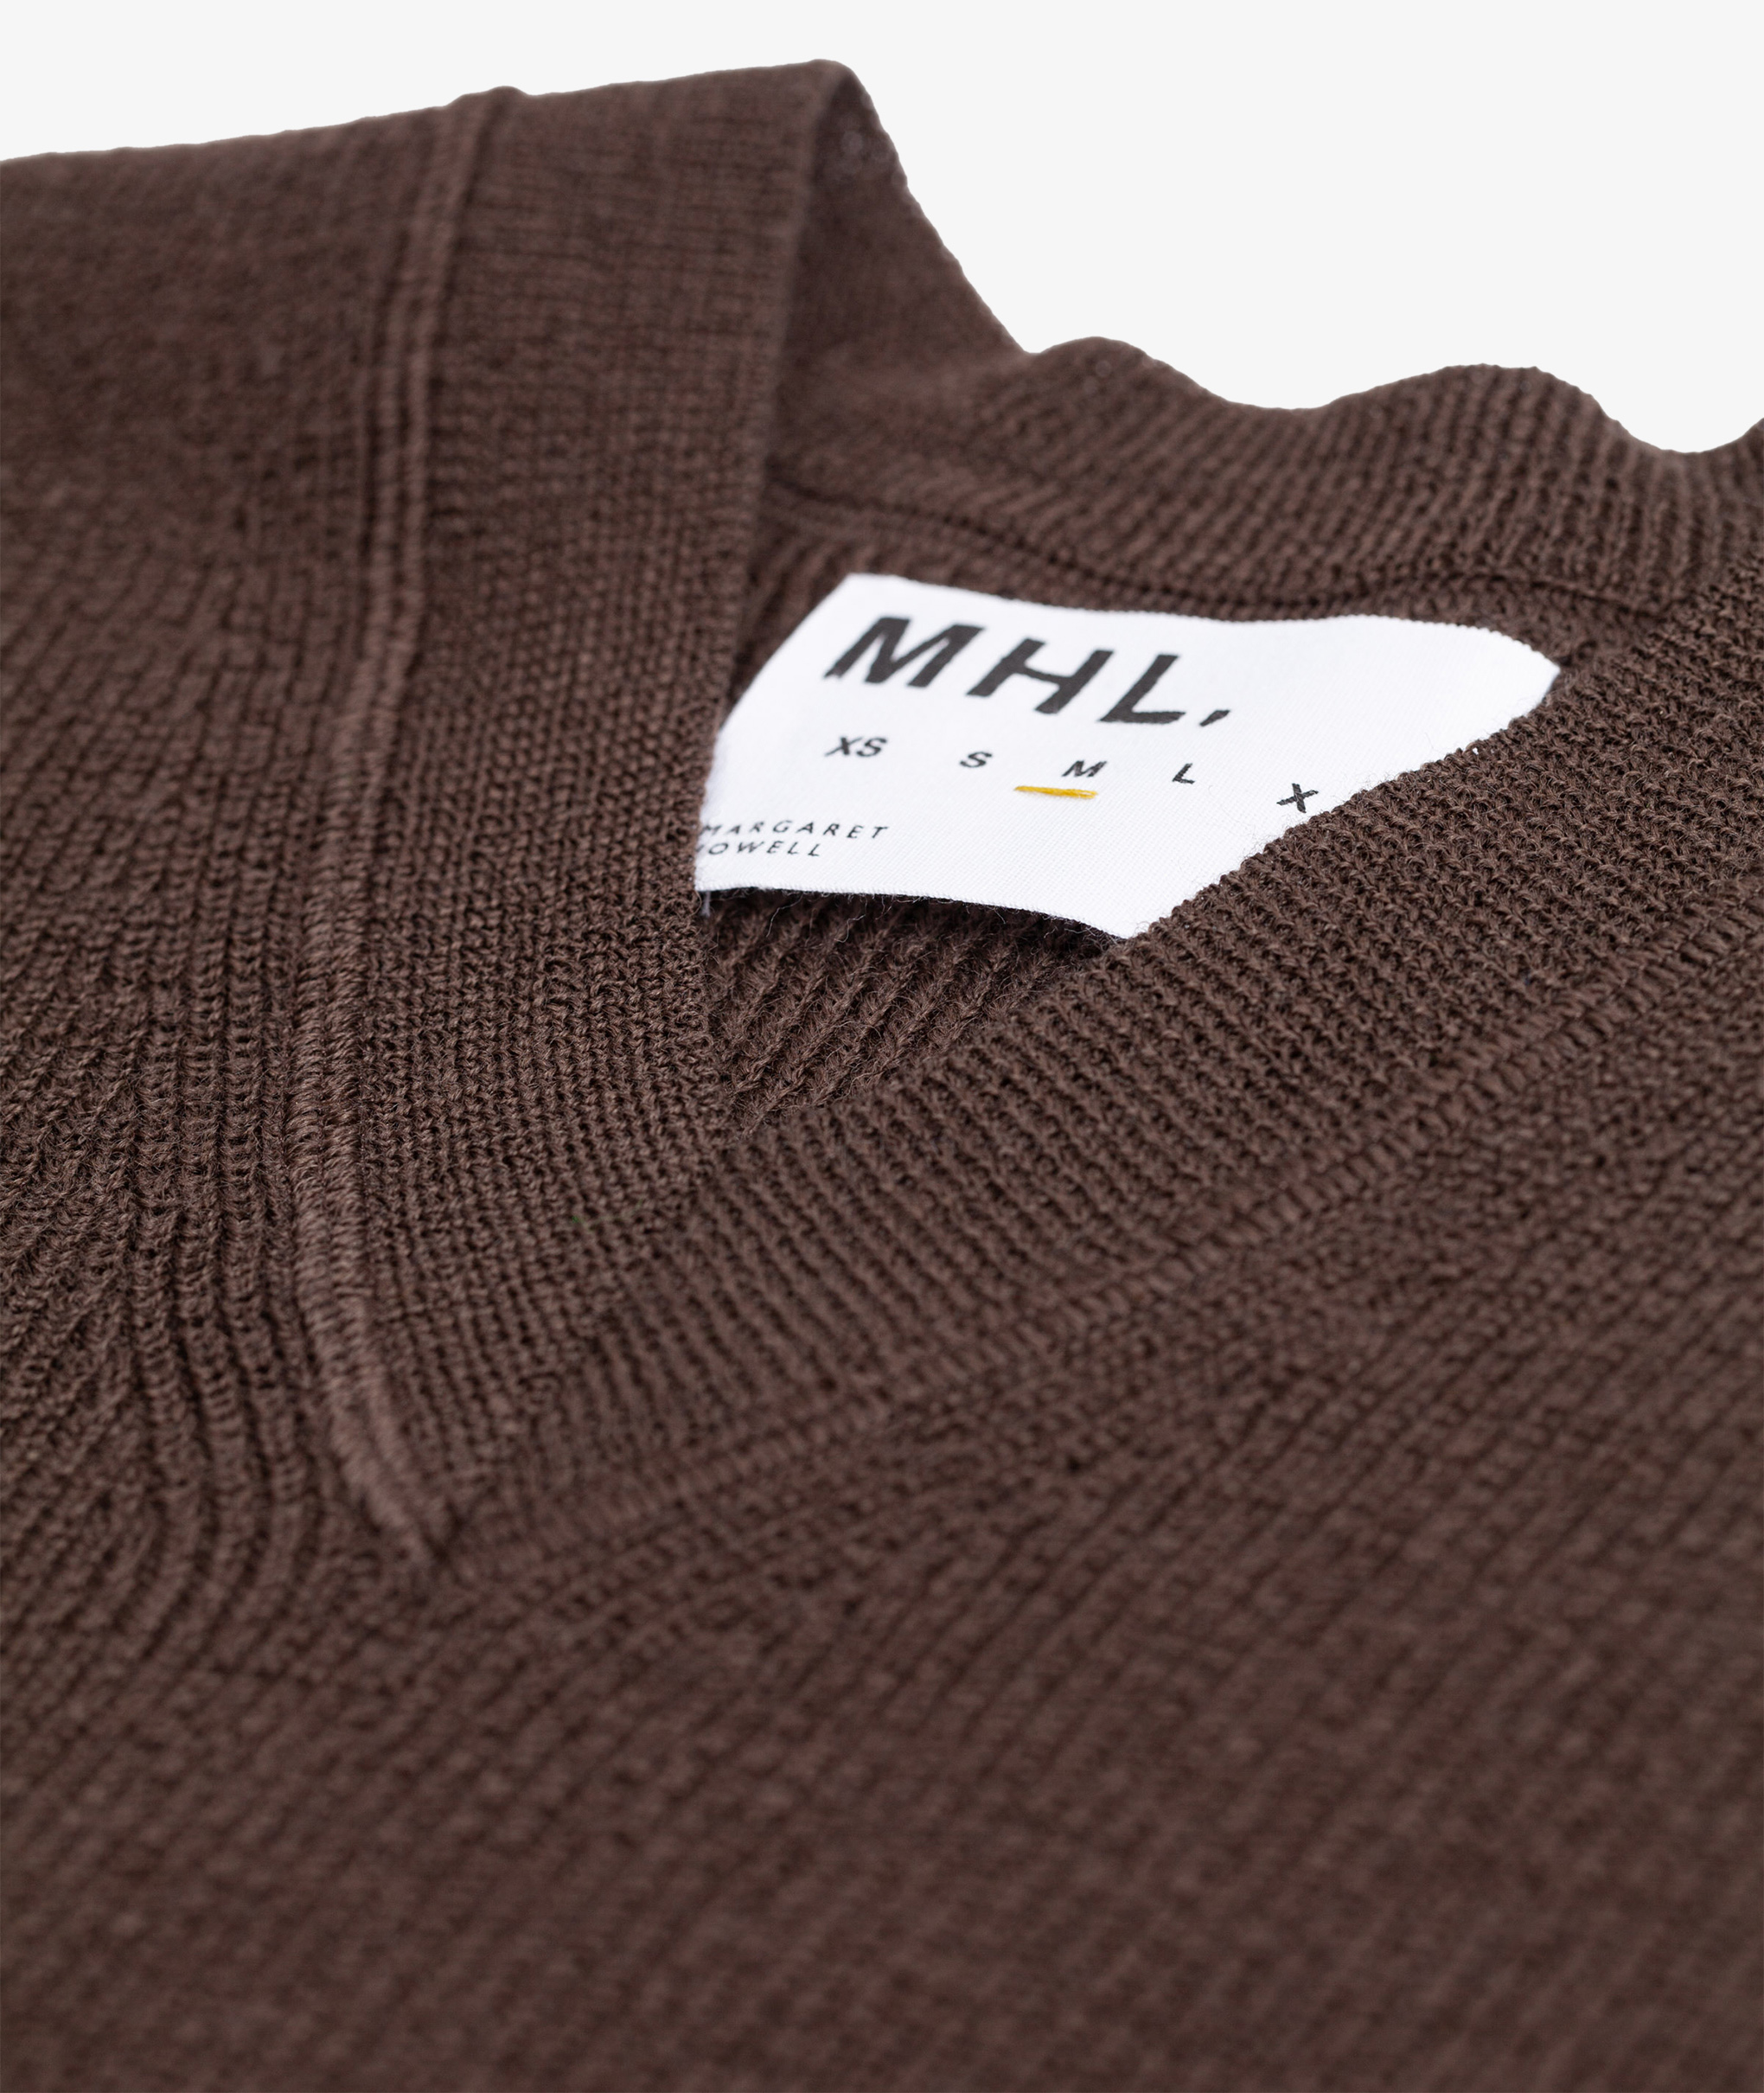 Norse Store | Shipping Worldwide - Margaret Howell MHL Ribbed 